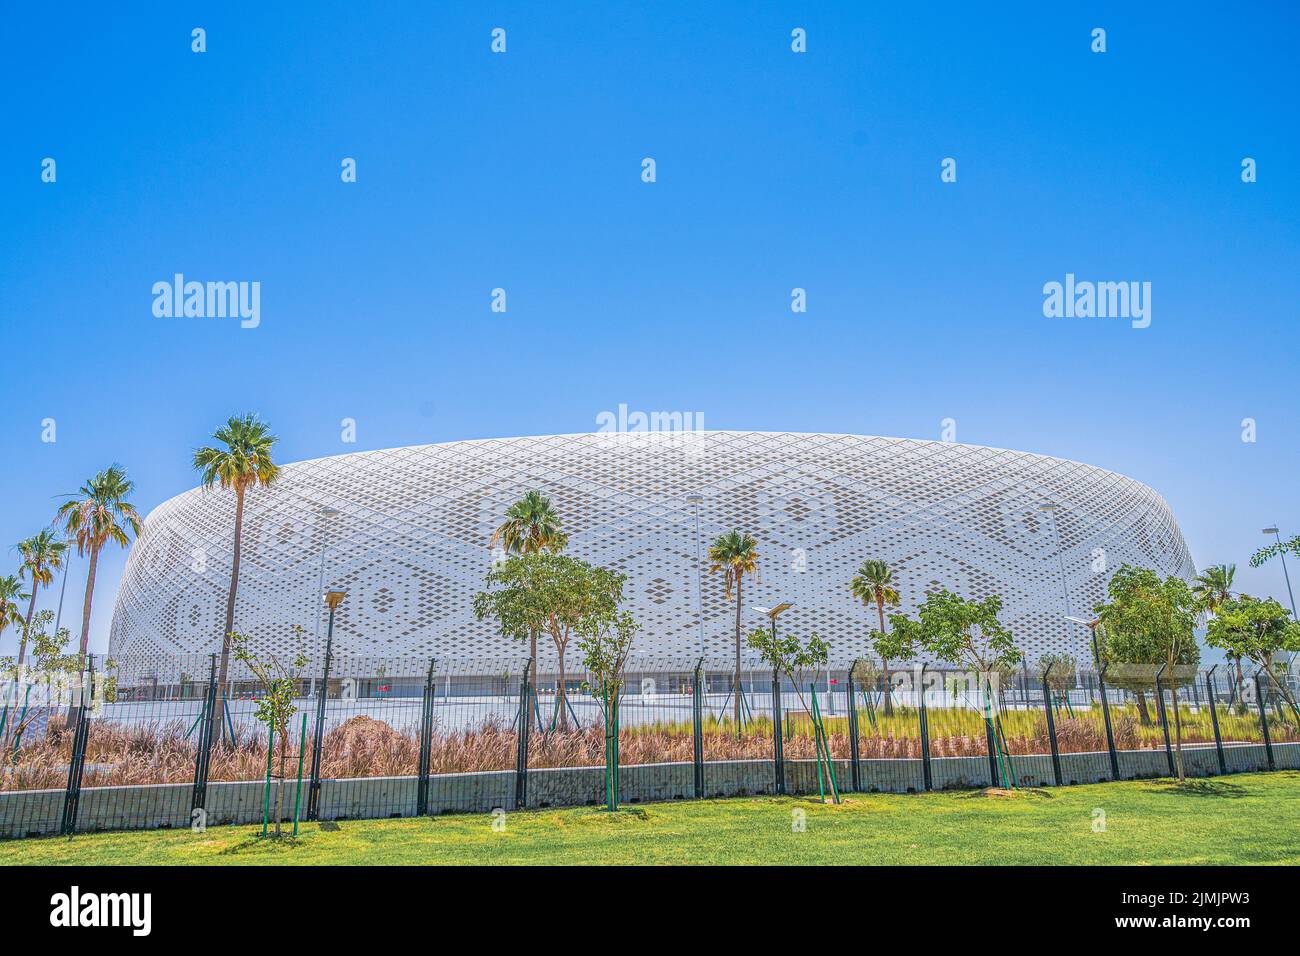 Al Thumama Stadium located in Qatar for the 2022 for FIFA World Cup Stock Photo